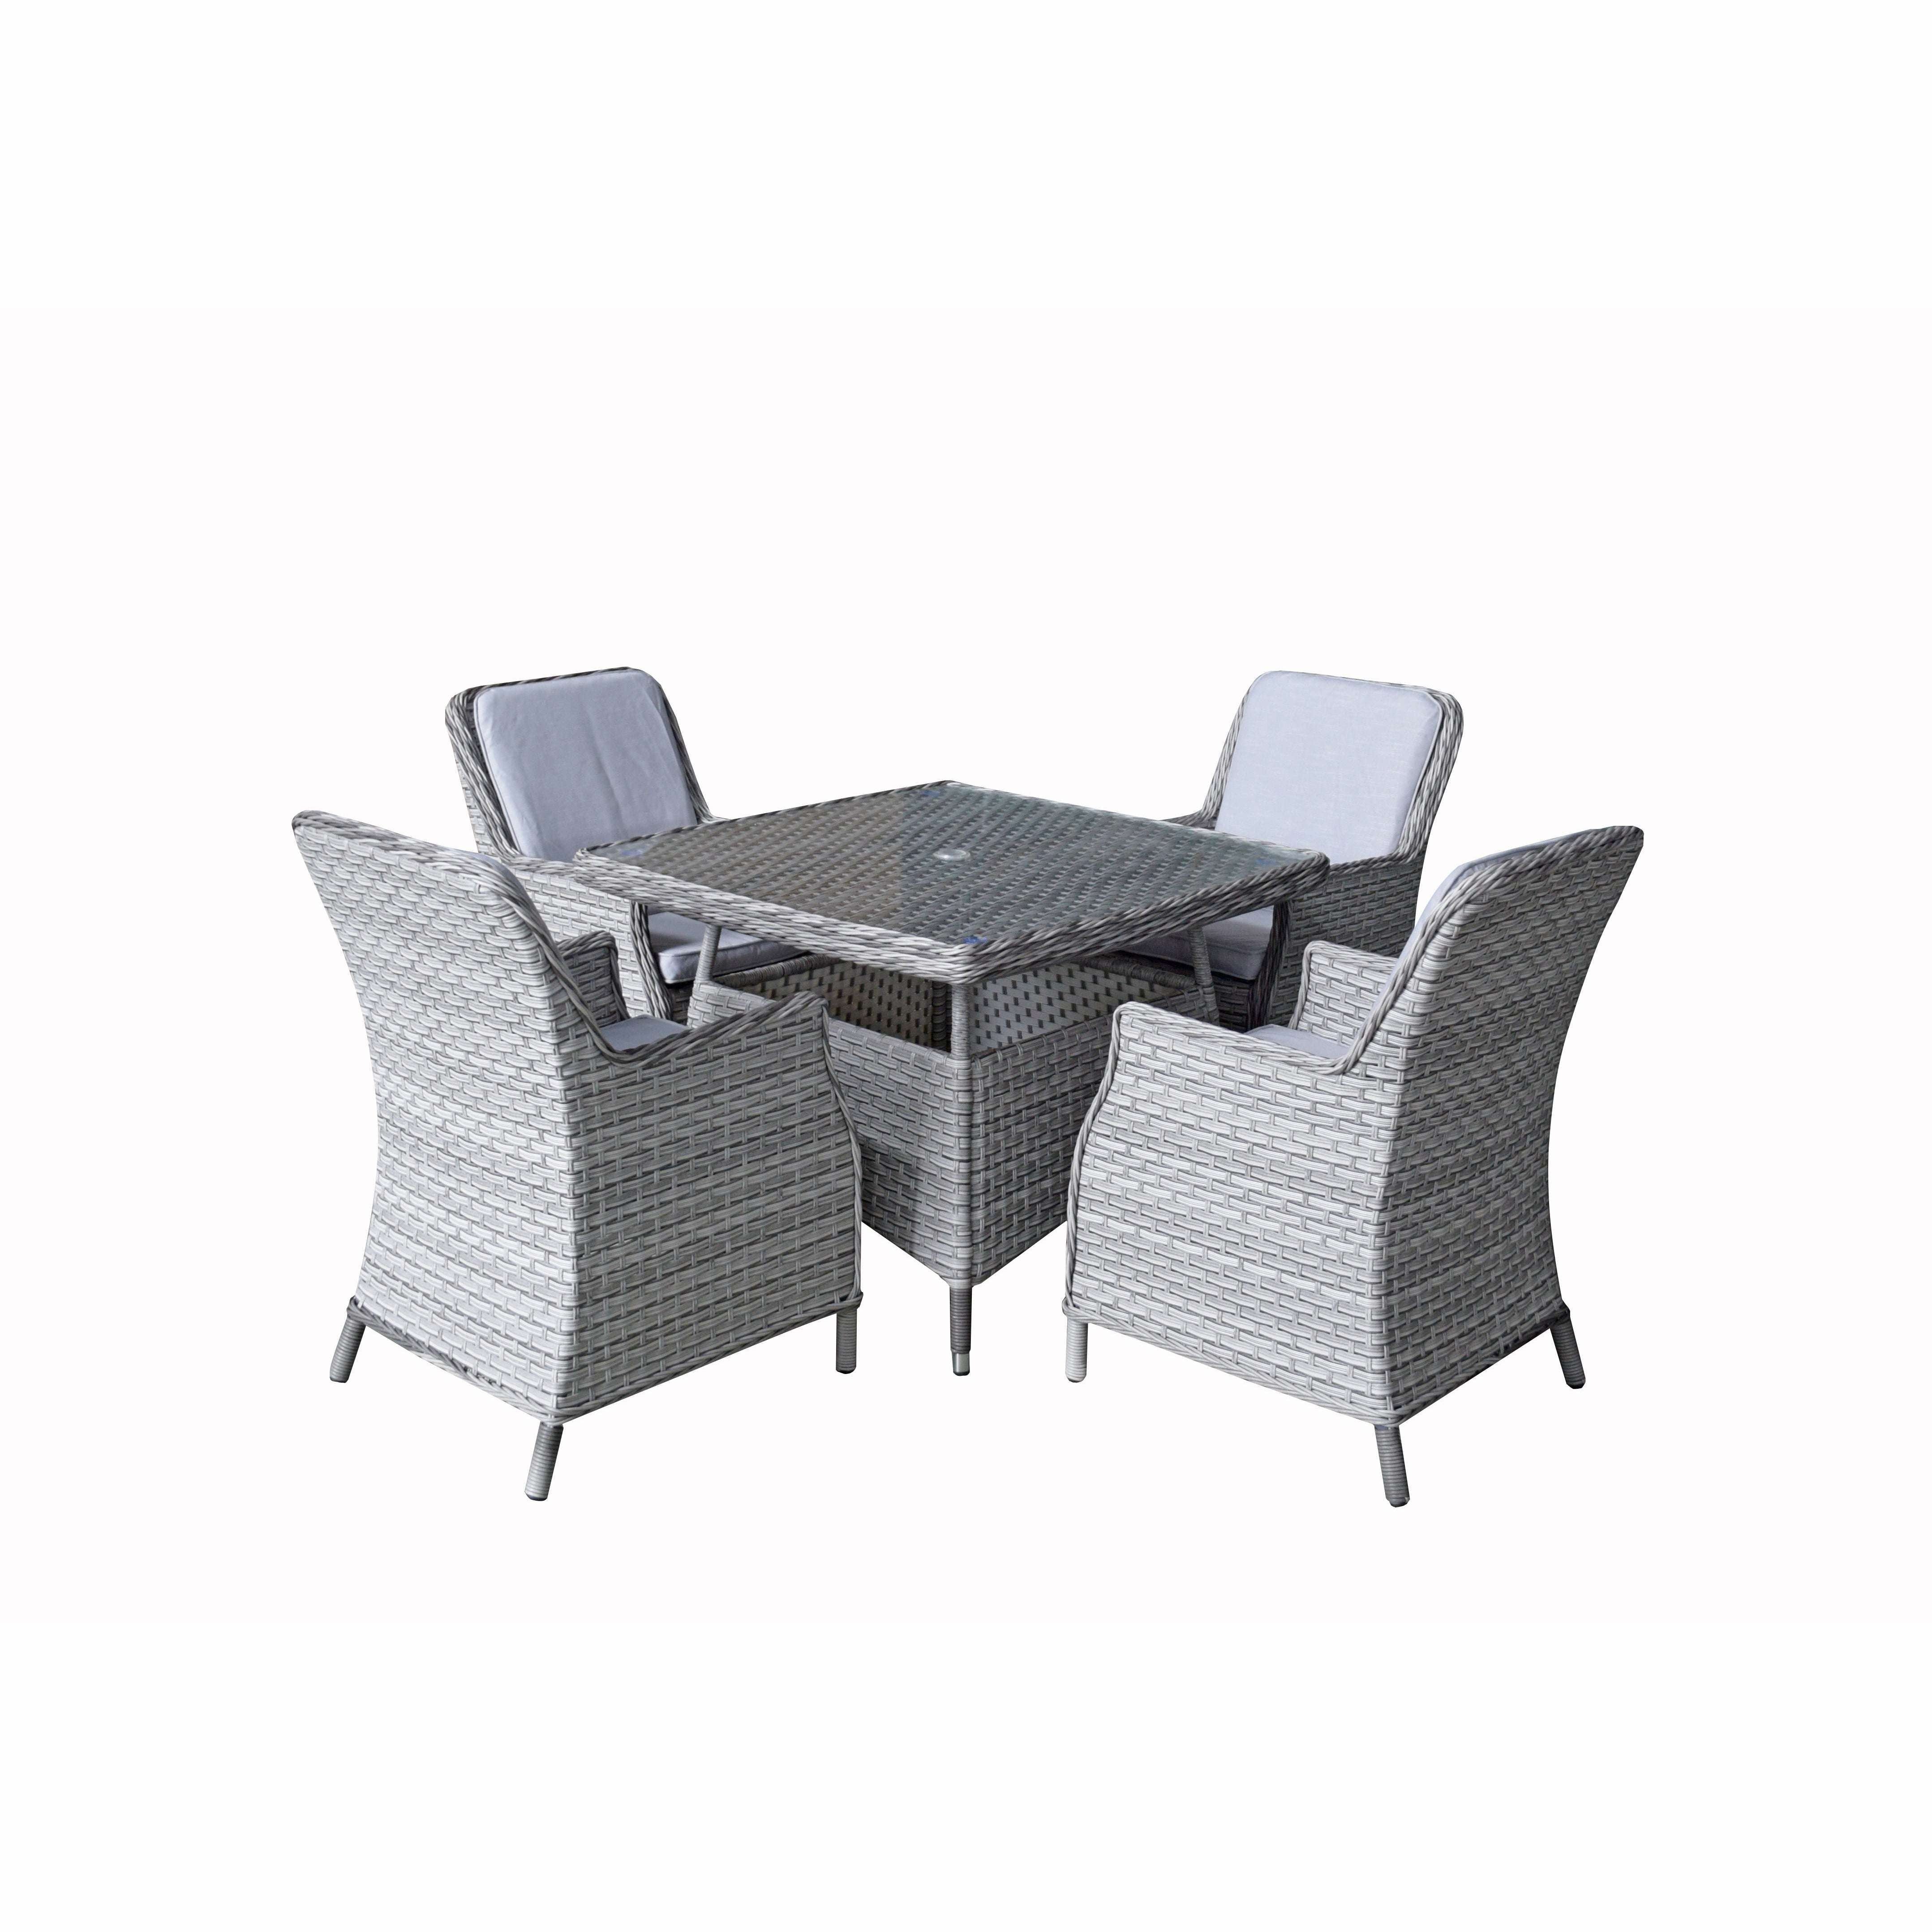 Exceptional Garden:Signature Weave Edwina 4-Seater Square Dining Set